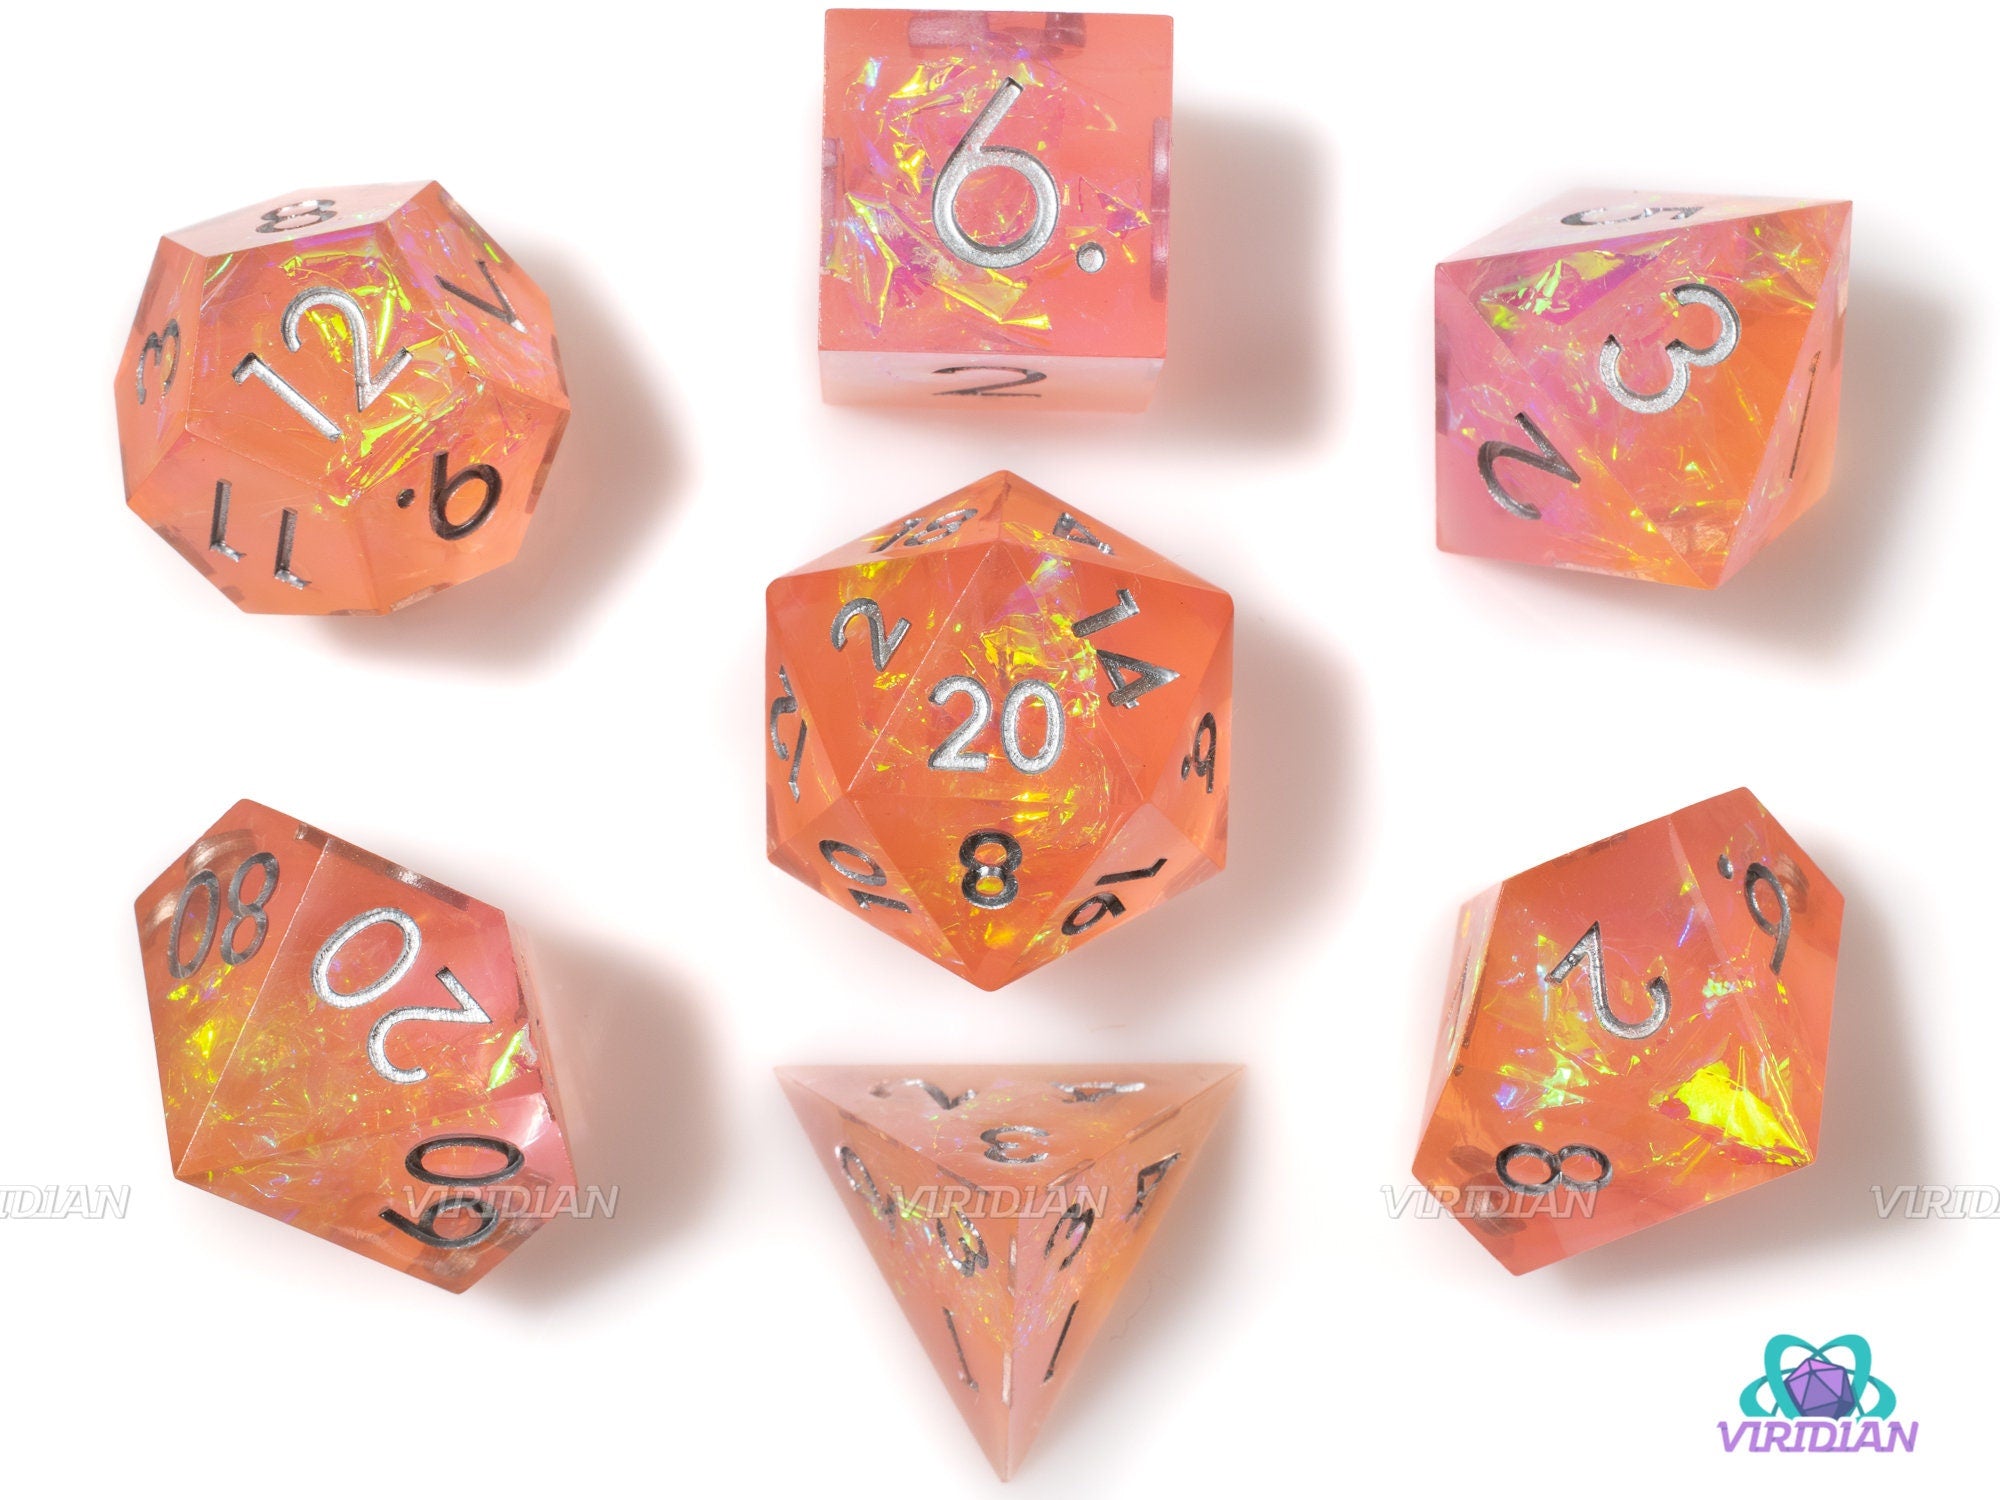 Peach Shimmer | Sharp-Edged with Holographic Film | Pink & Orange Translucent, Glittery Resin Dice Set (7)